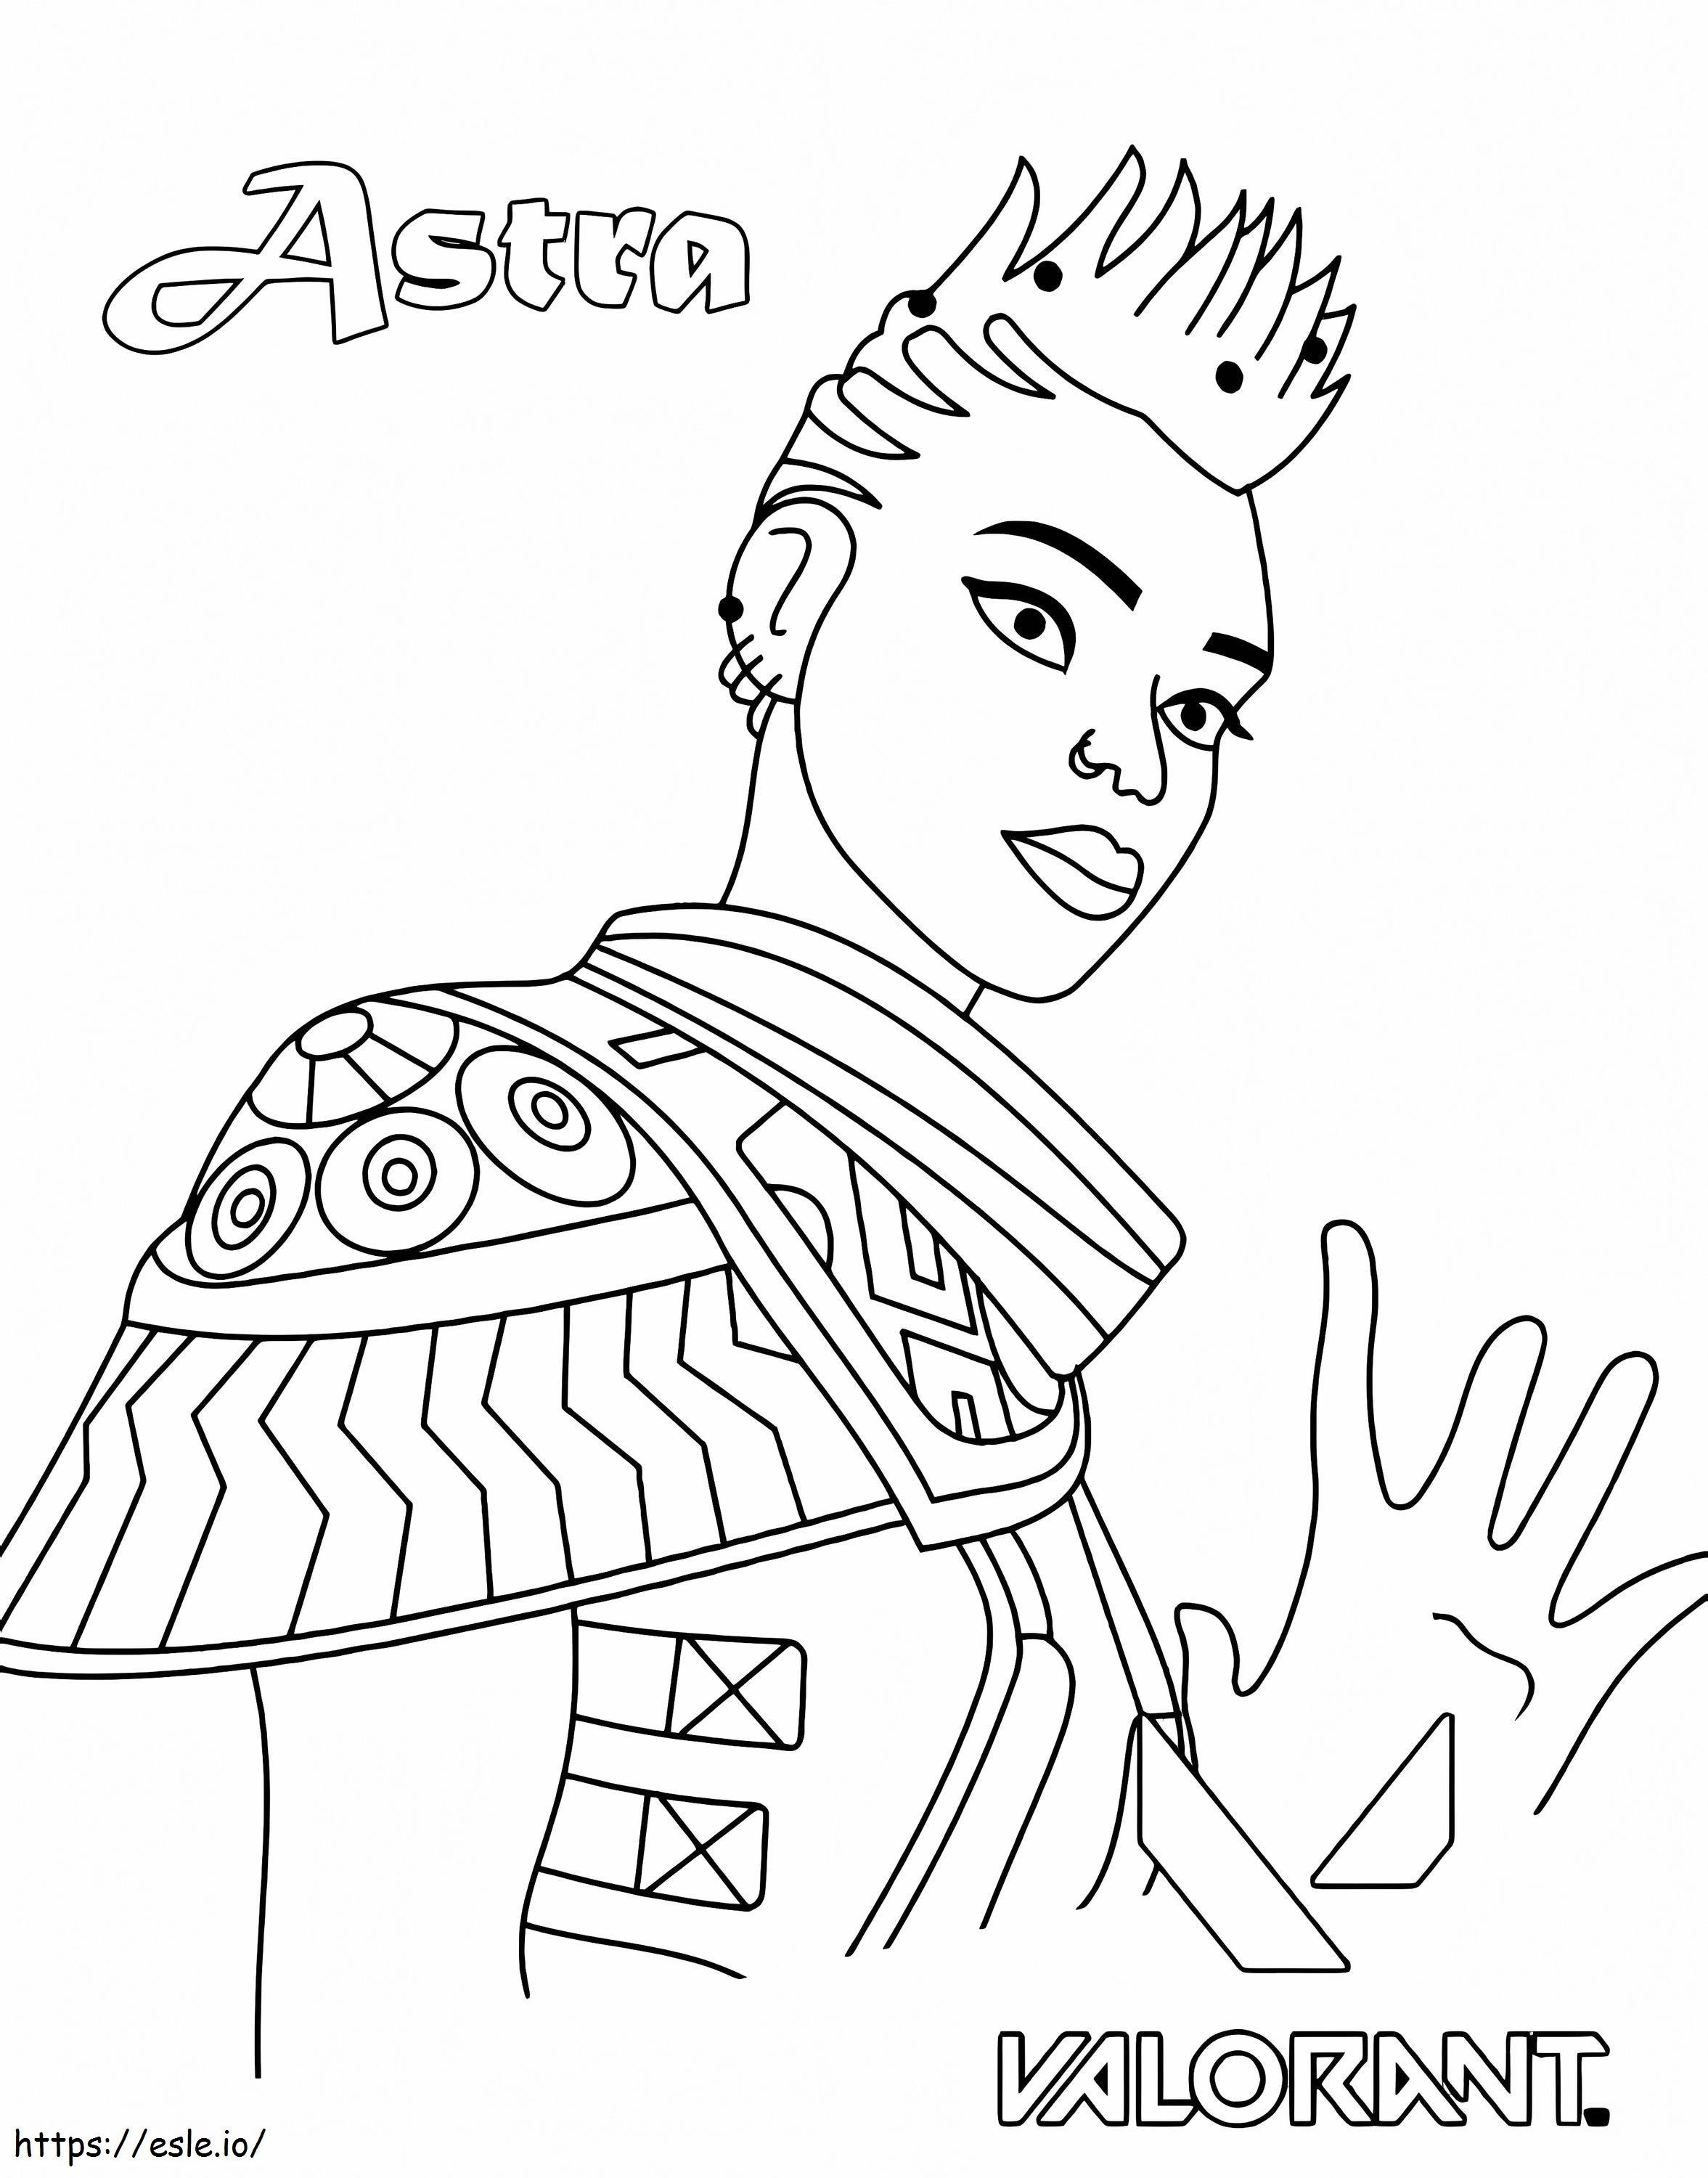 Astra From Valorant coloring page